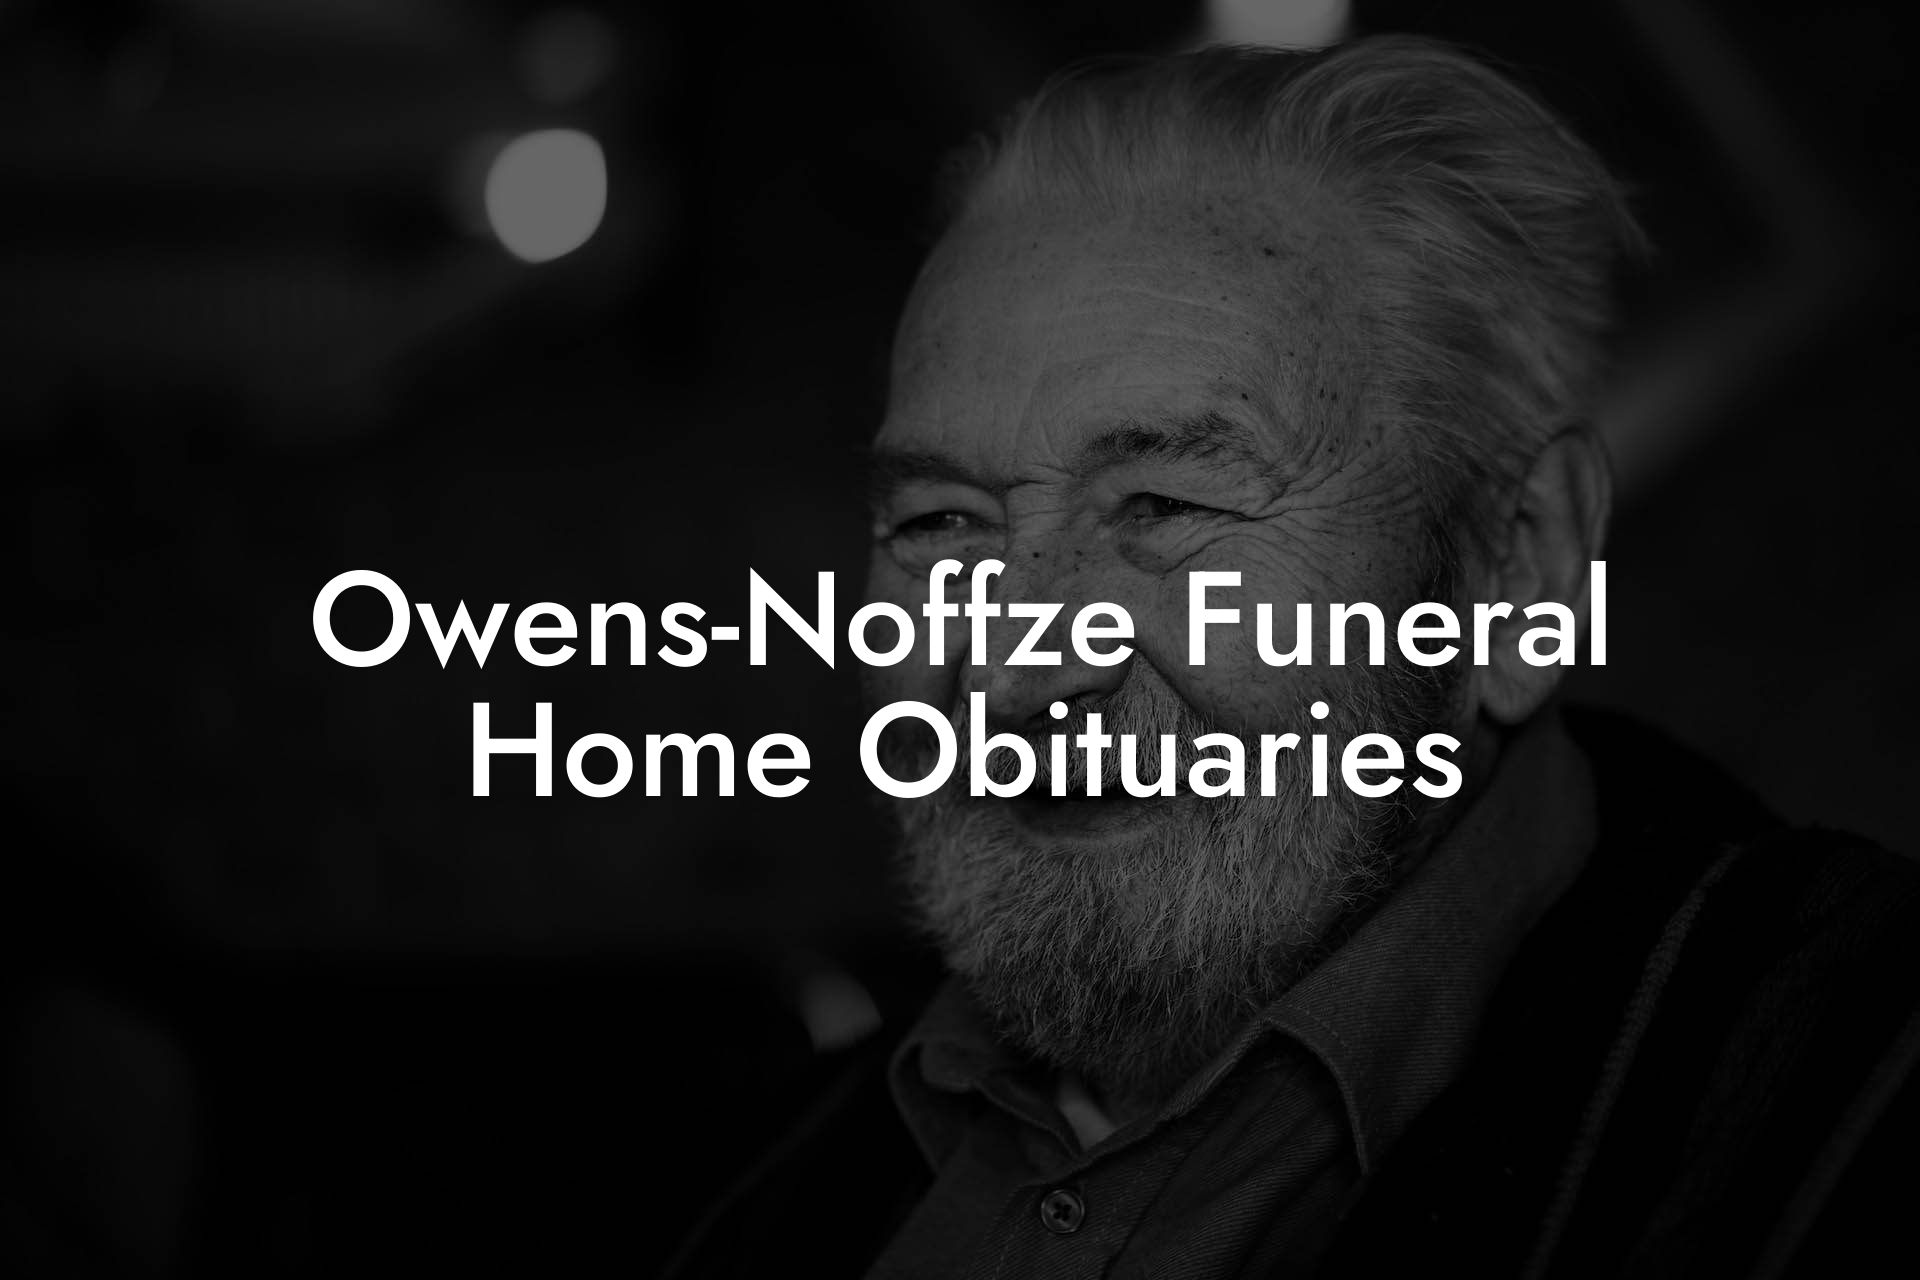 Owens-Noffze Funeral Home Obituaries